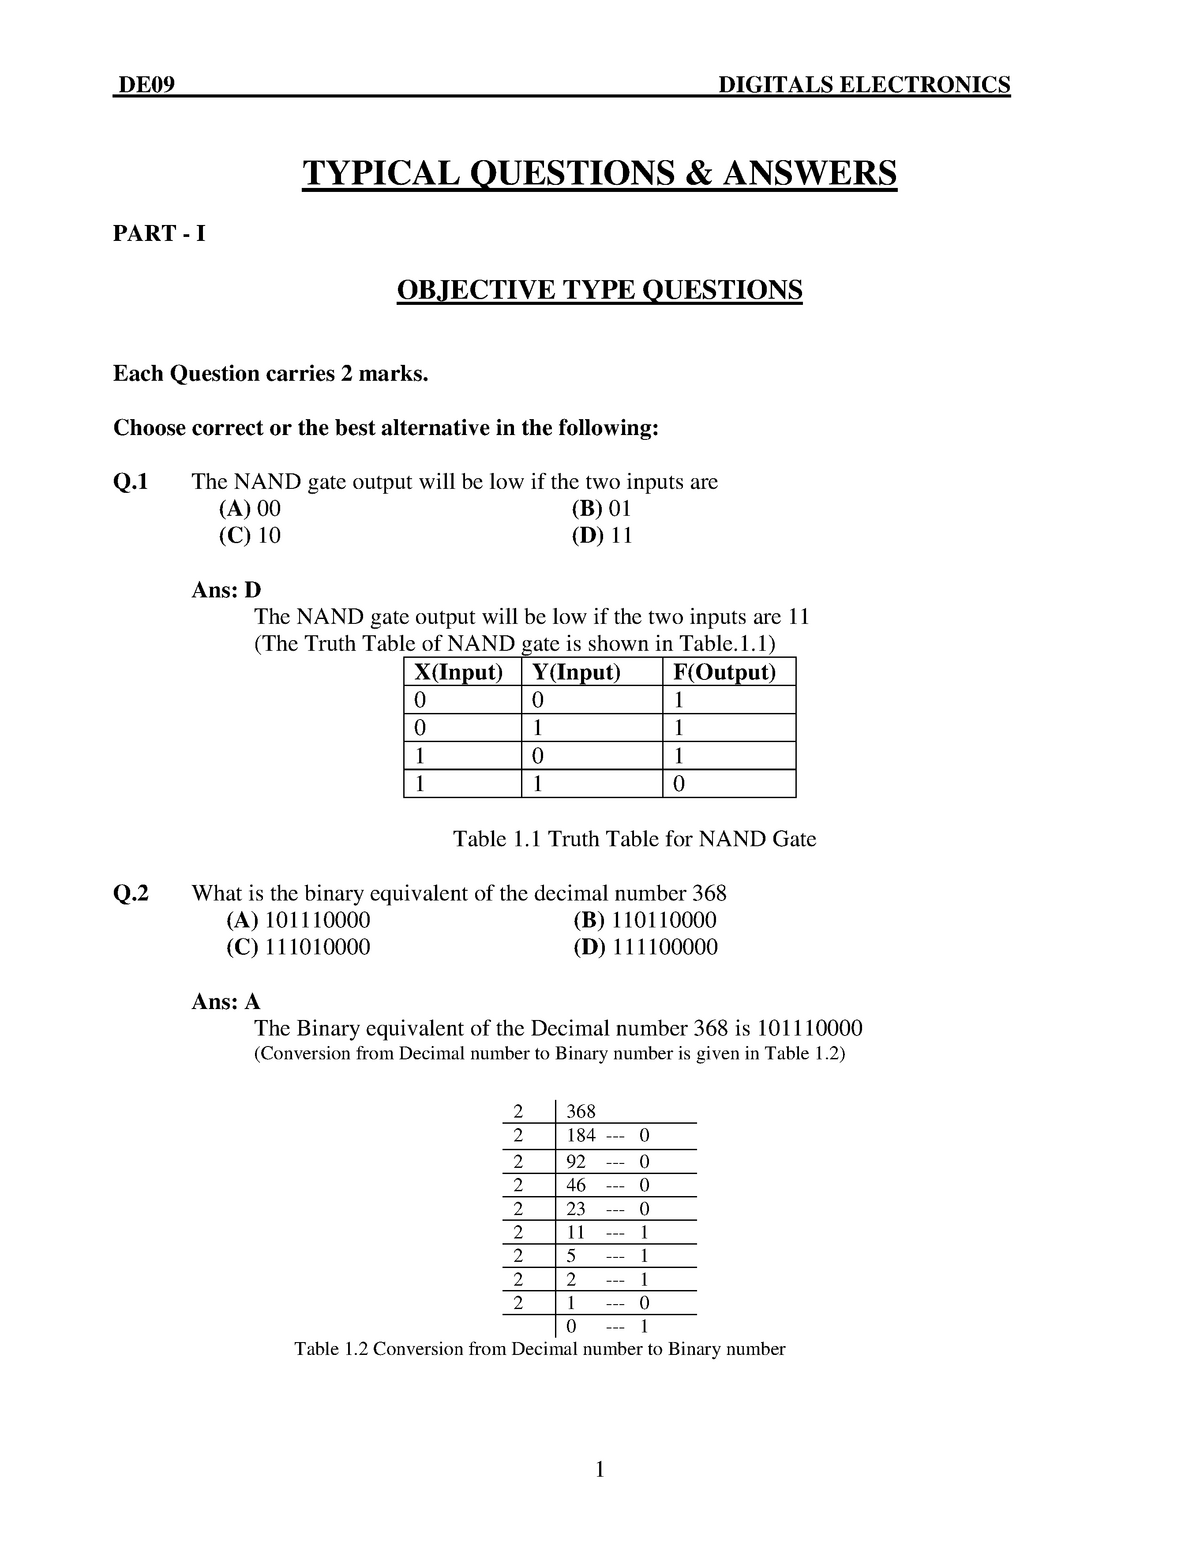 assignment problem objective type questions